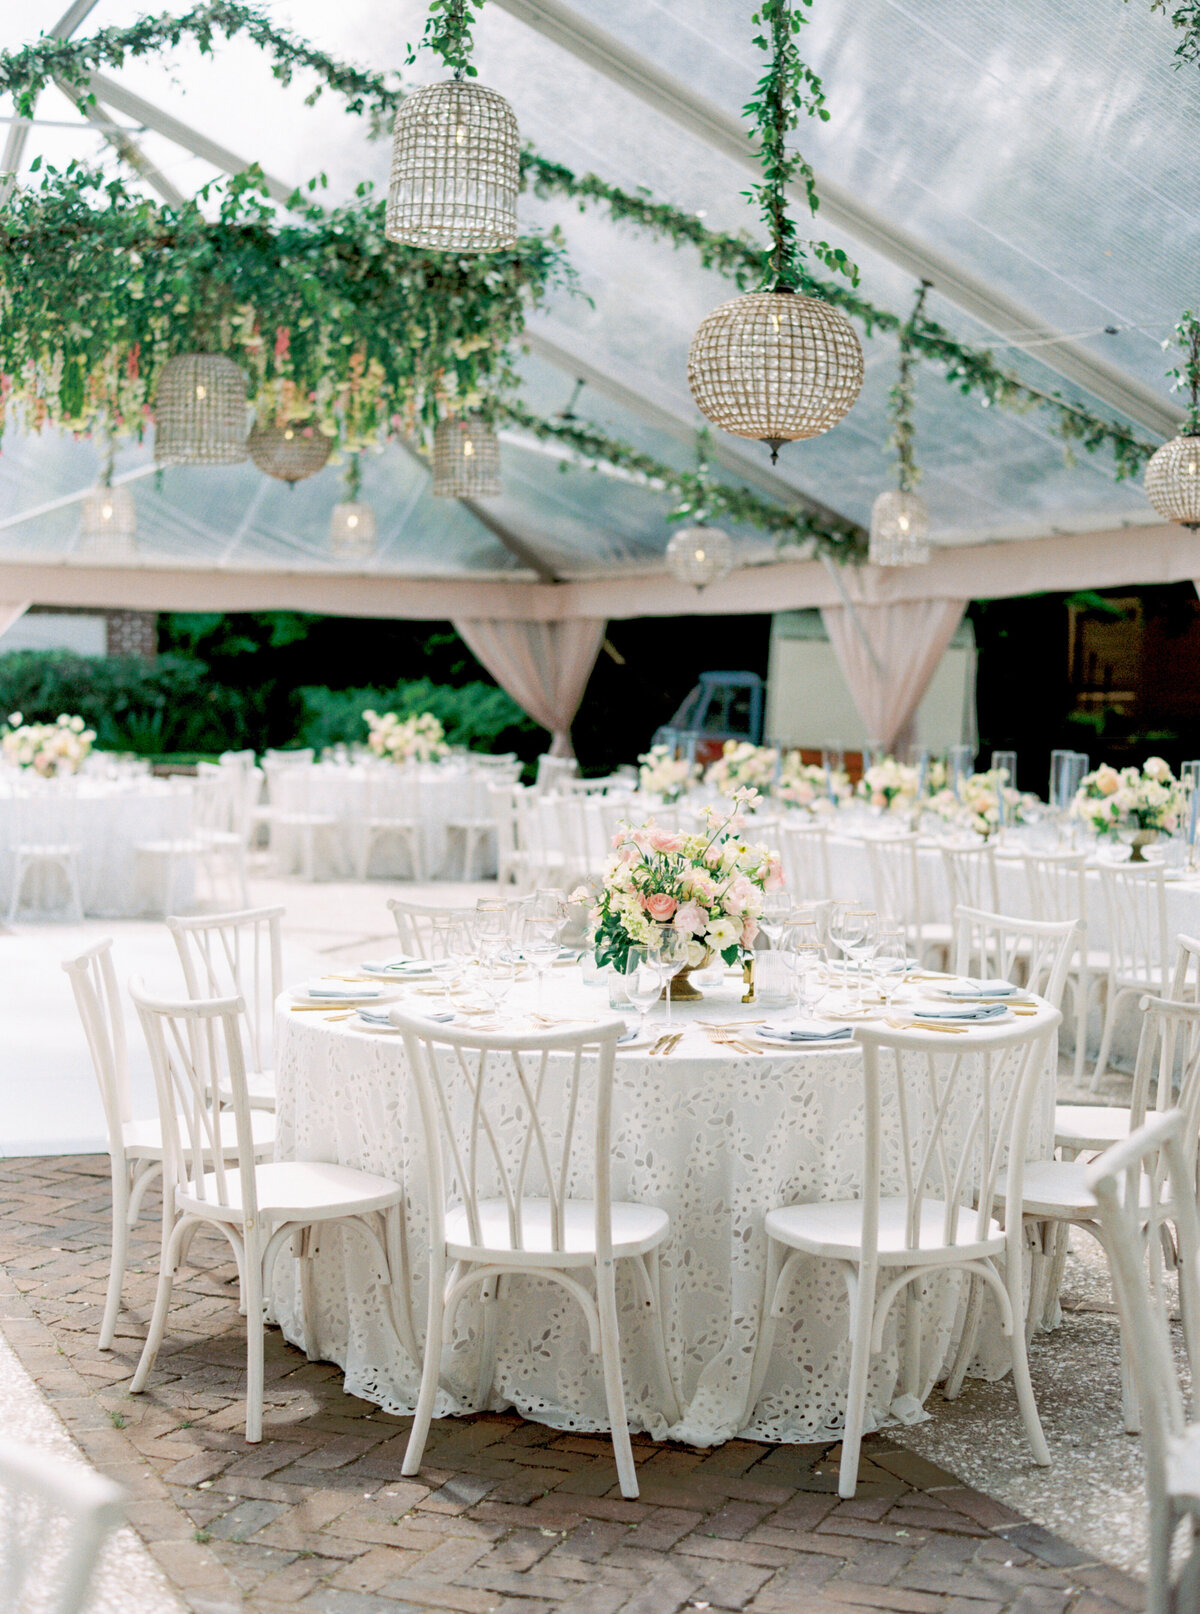 Light and bright spring wedding reception design. Bird cage lighting. Clear tent and hanging greenery with flowers.